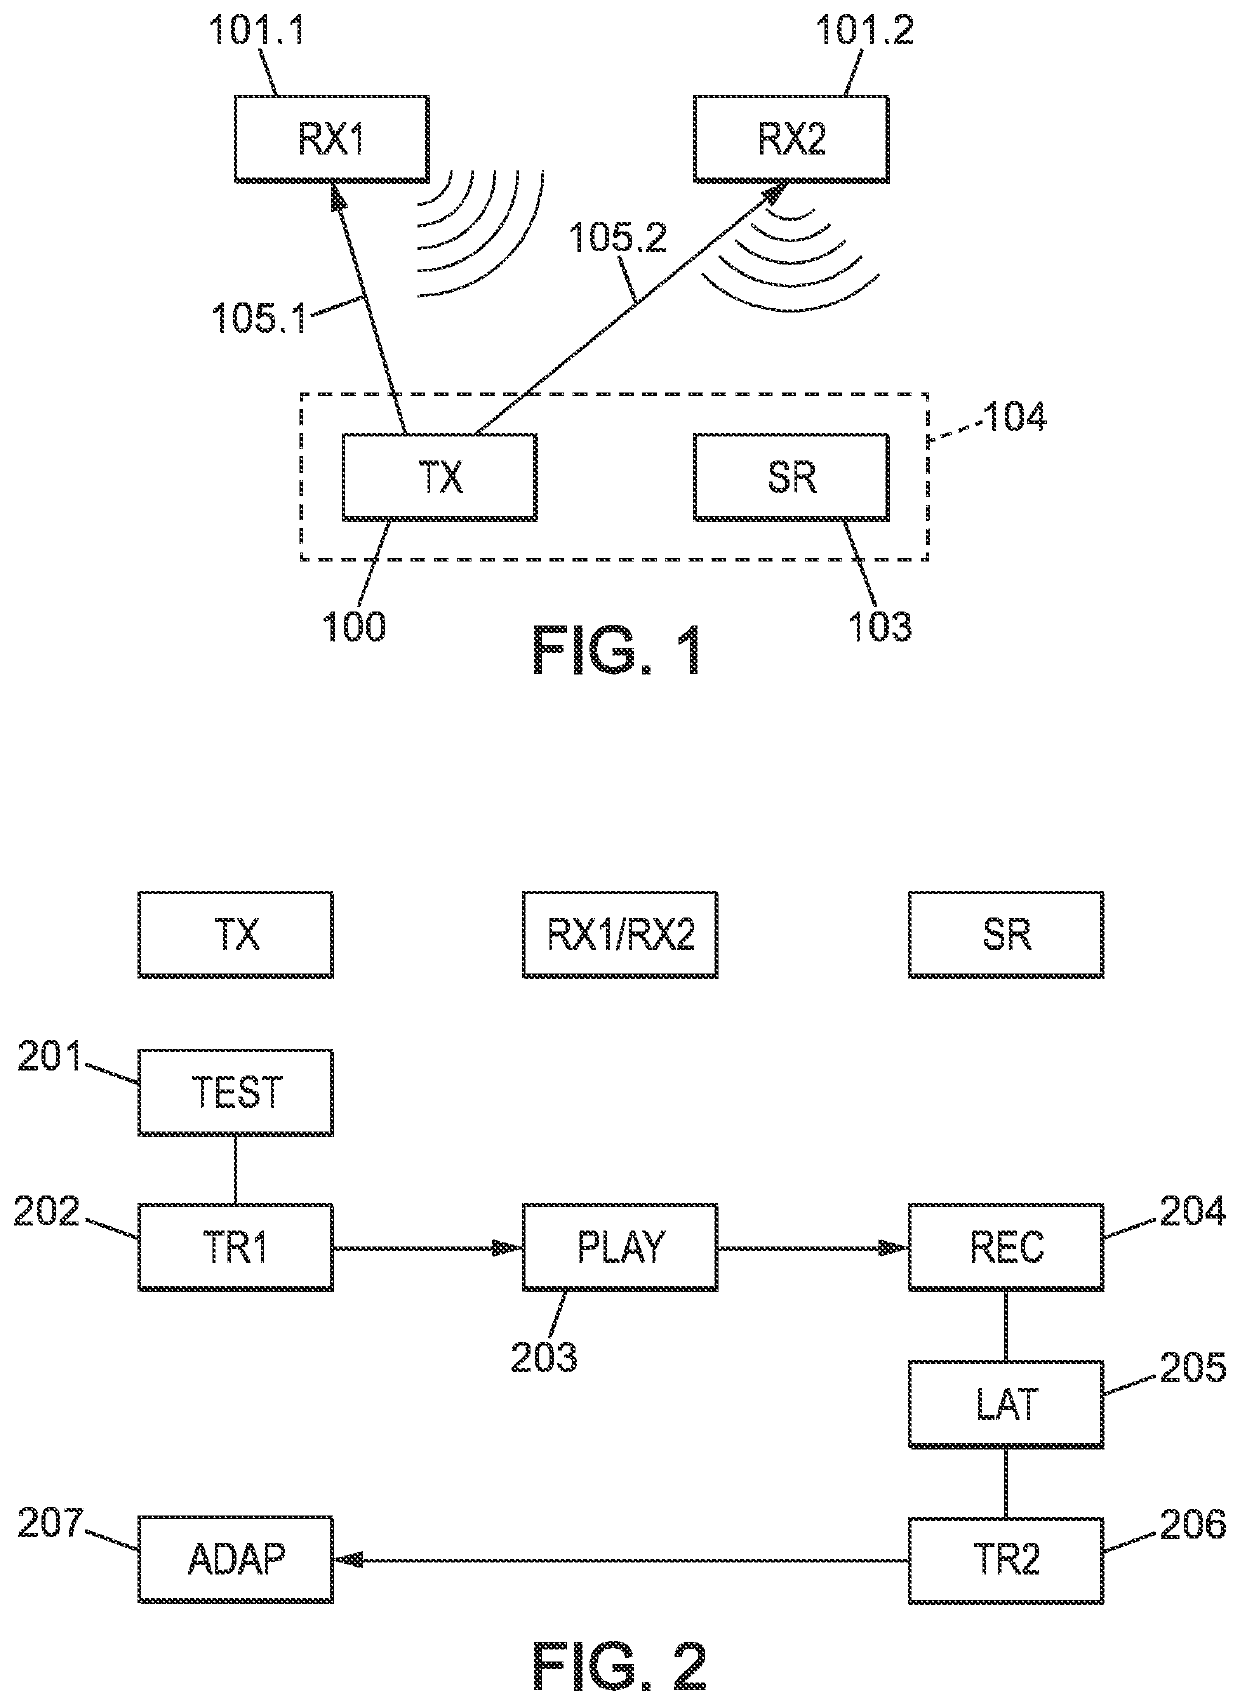 Obtention of latency information in a wireless audio system